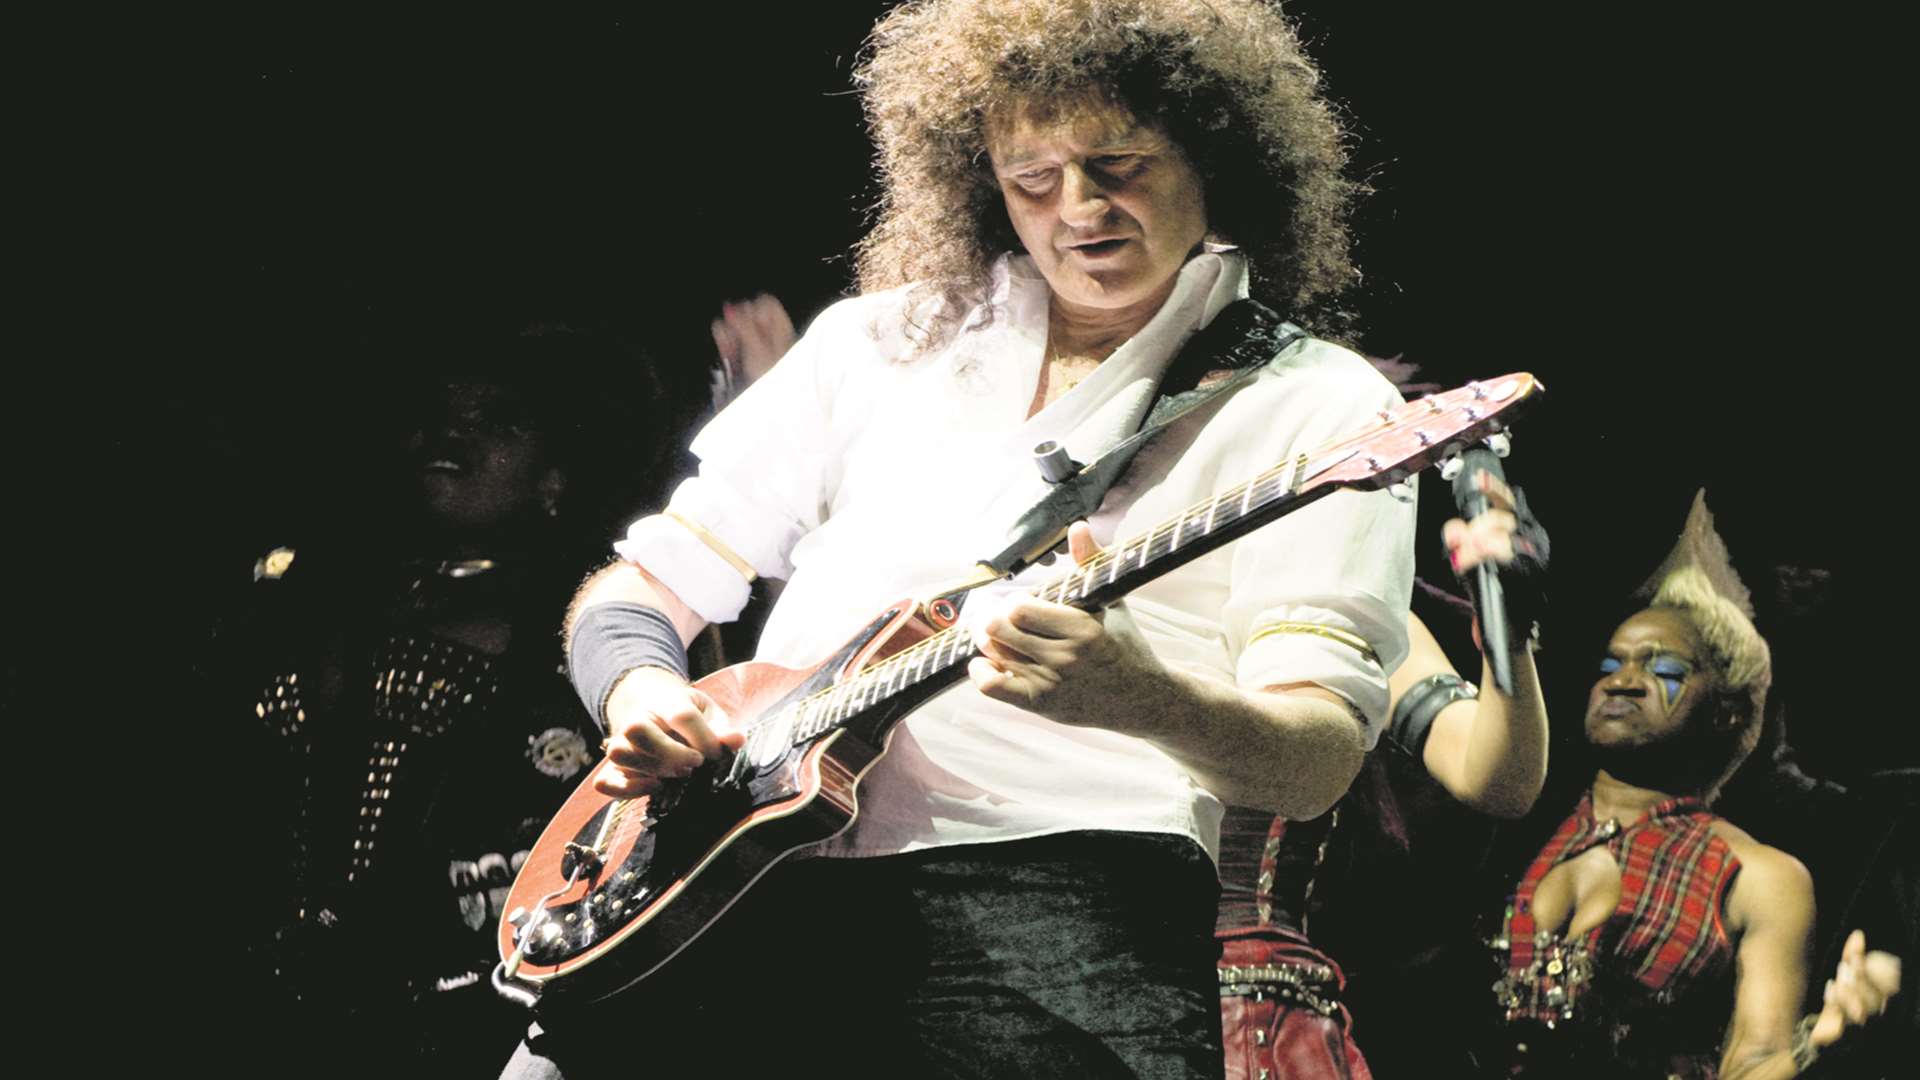 Brian May was said to be eyeing up a country estate near Canterbury